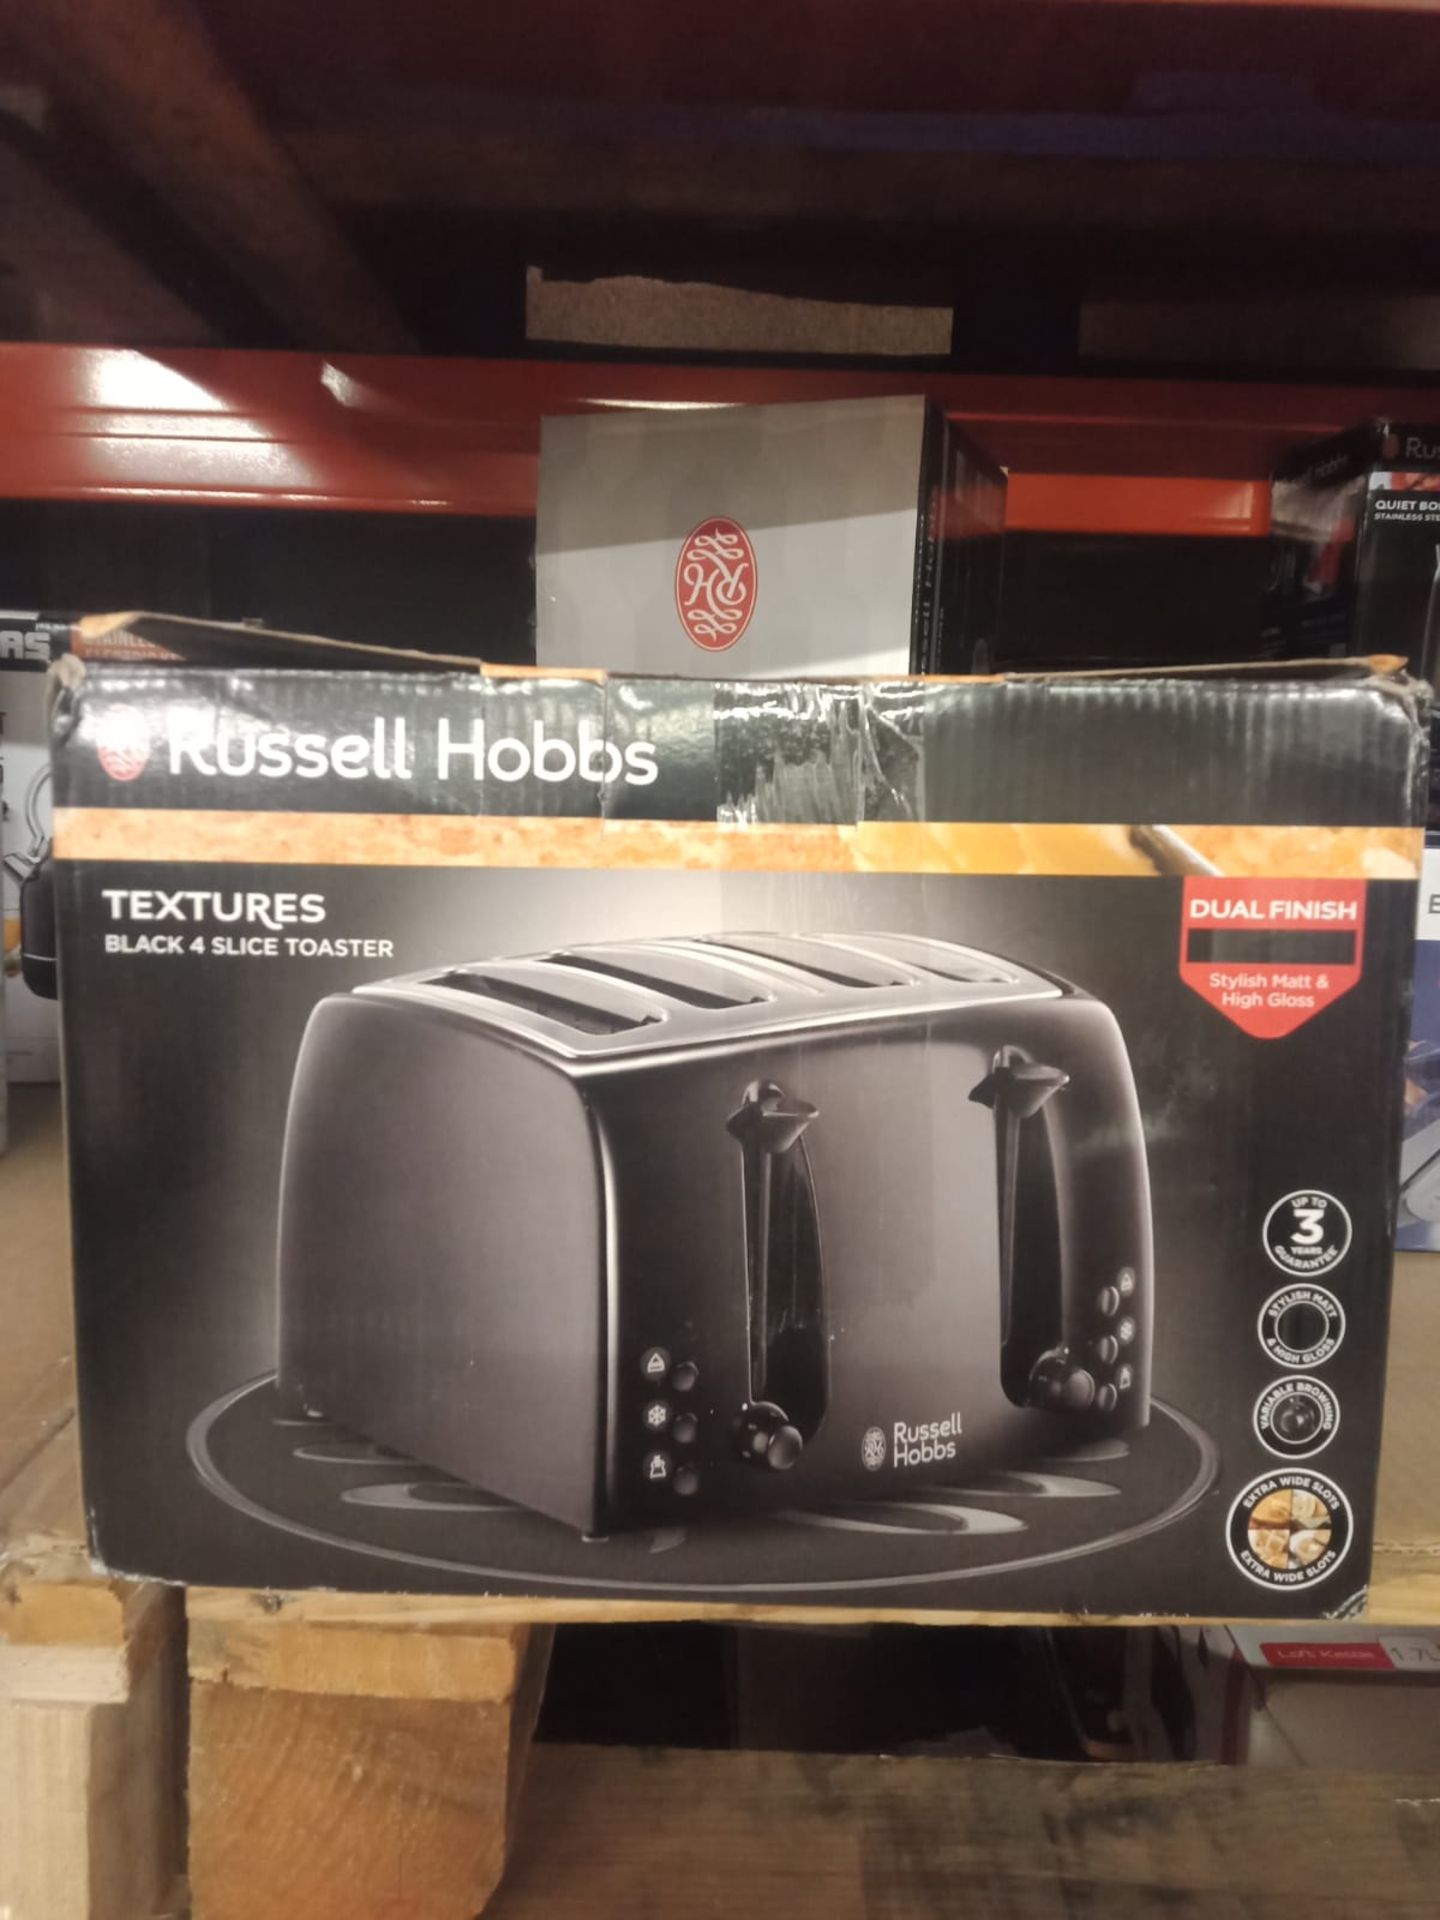 JOB LOT OF VARIOUS ELECTRONICS - WHICH INCLUDE, RUSSELL HOBBS IRON, POPCORN MAKER, TOASTER, BLENDER - Image 4 of 19